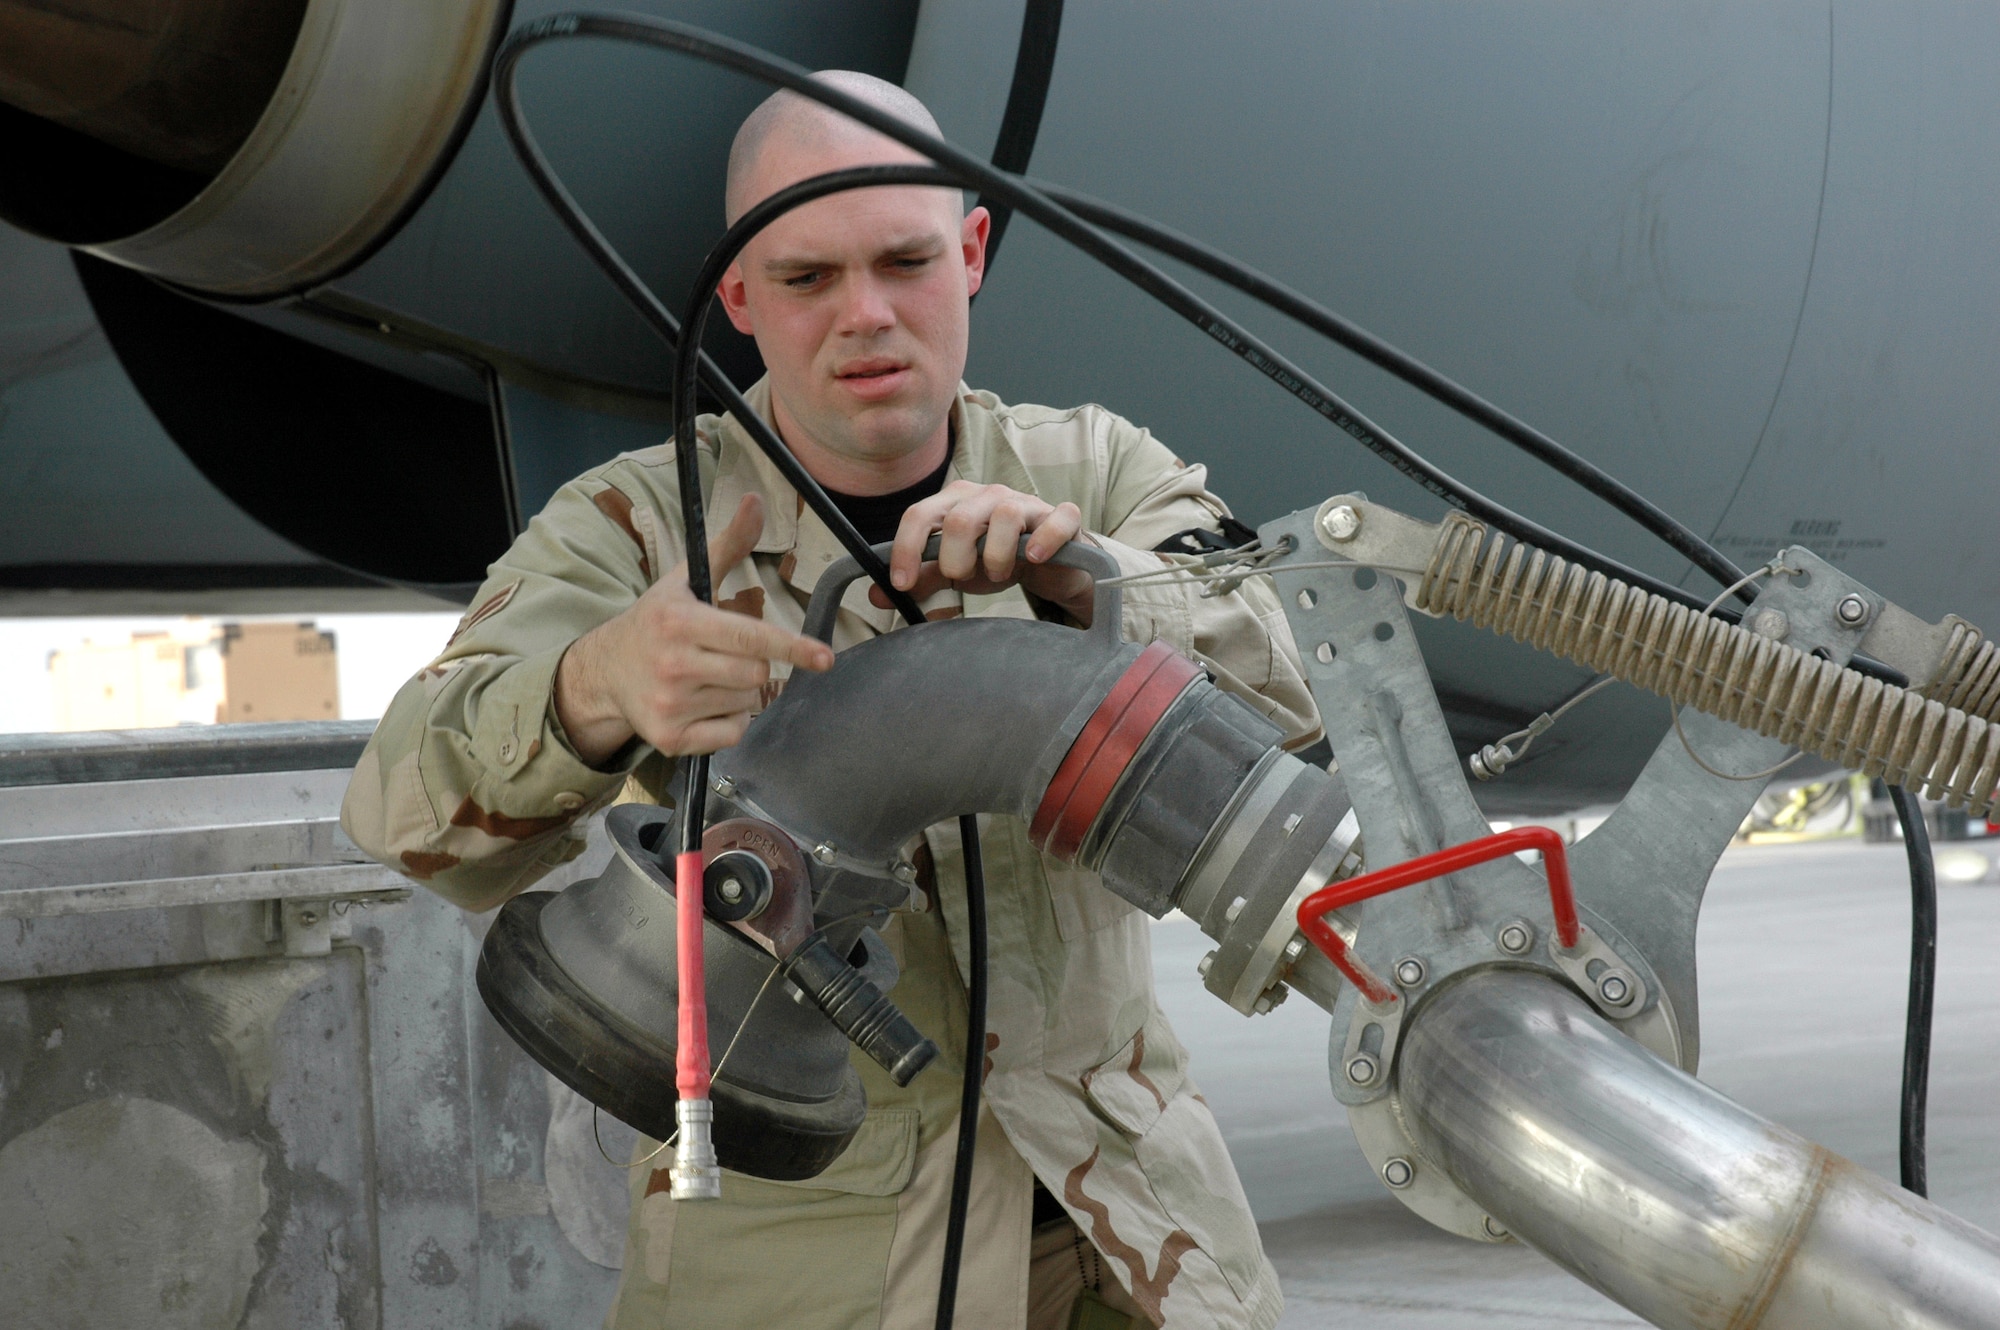 Airman 1st Class Robert Walsh prepares to refuel the first KC-135 Stratotanker through the new hydrant system Jan. 24 in Southwest Asia. Airman Walsh is assigned to the 379th Expeditionary Logistics Readiness Squadron Petroleum, Oil and Lubricants Flight. (U.S. Air Force photo/Senior Airman Erik Hofmeyer)